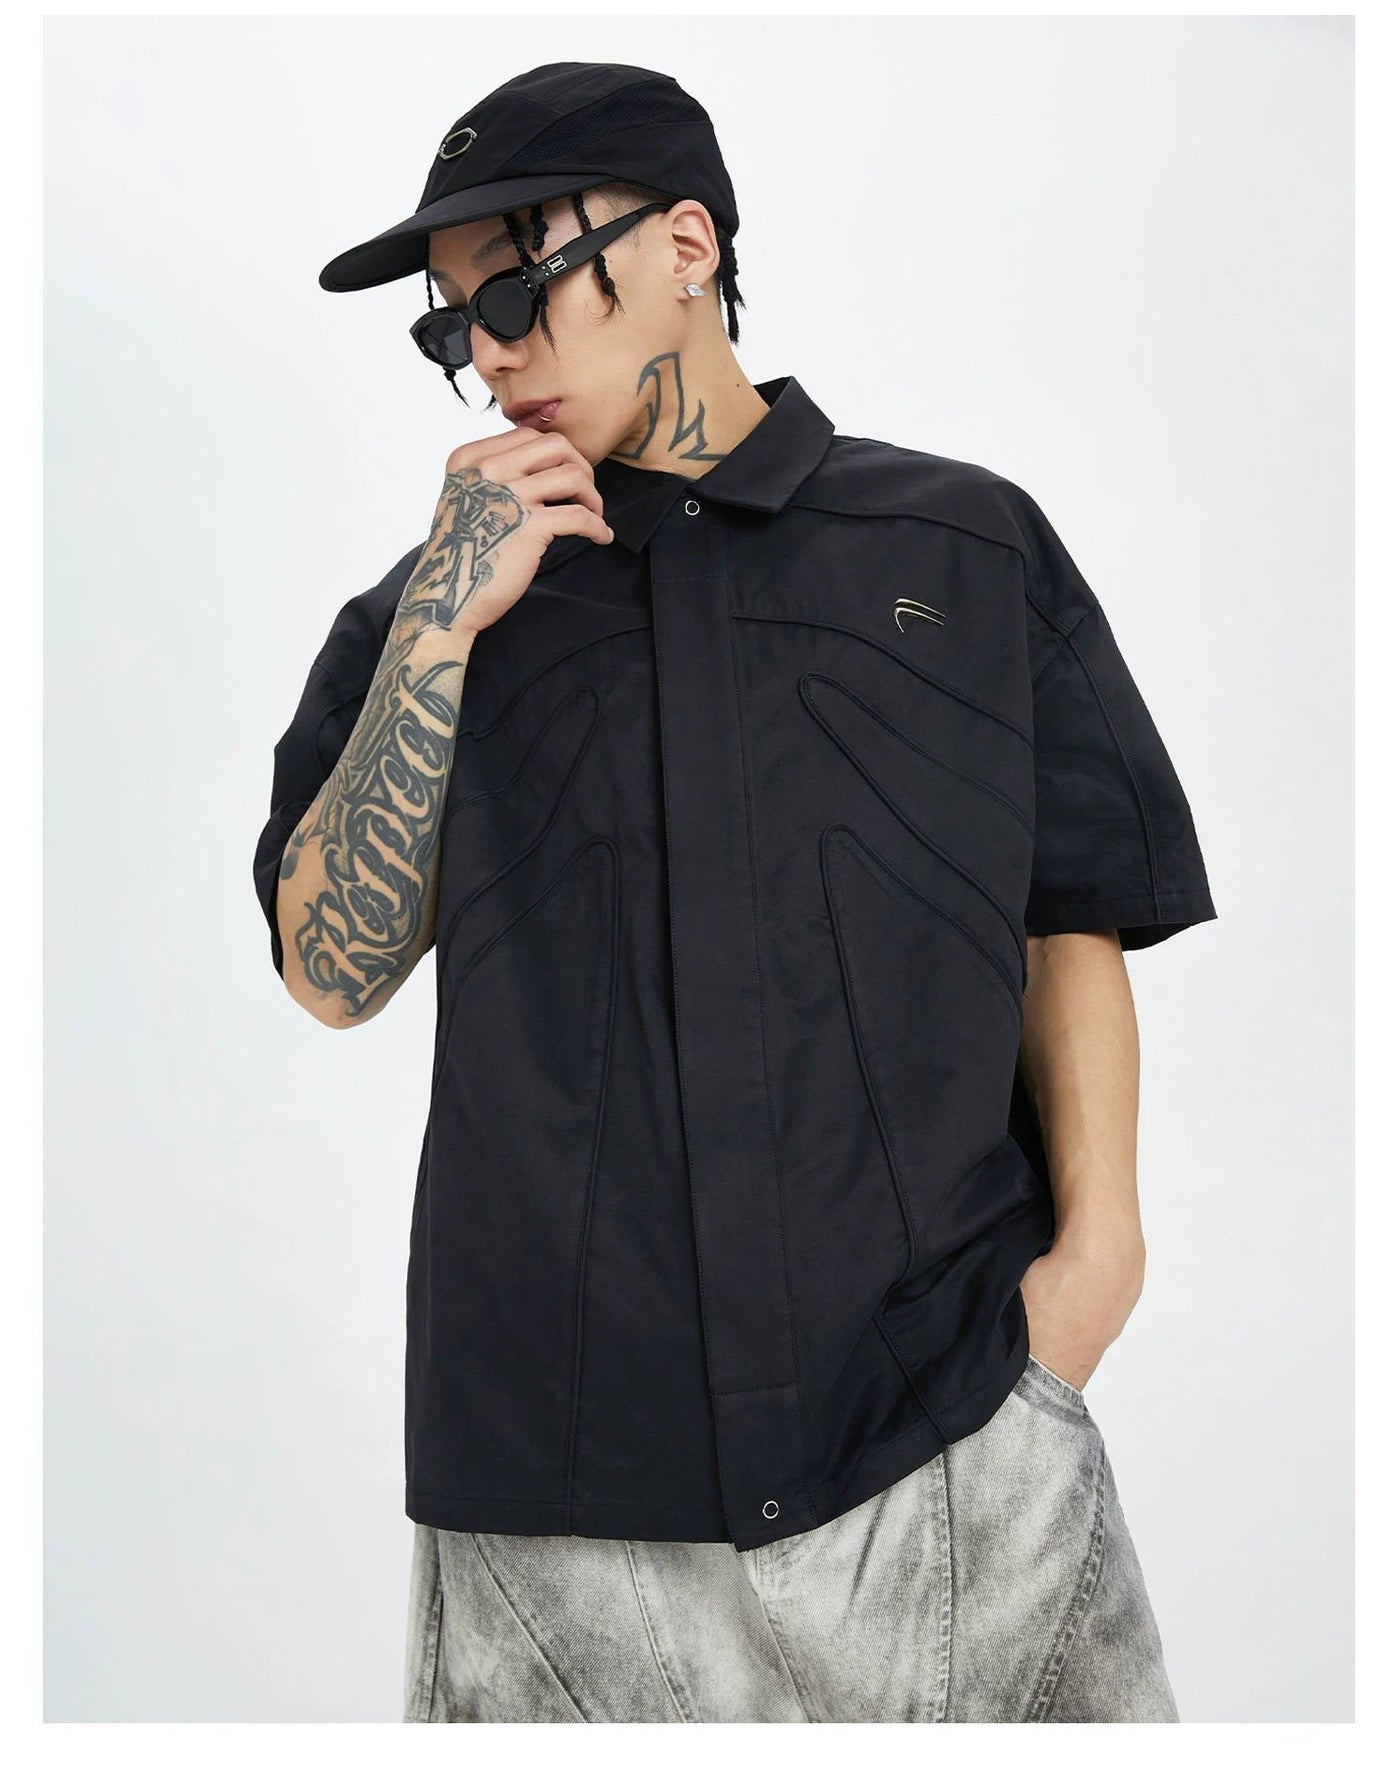 Lines Structured Detail Shirt Korean Street Fashion Shirt By Face2Face Shop Online at OH Vault